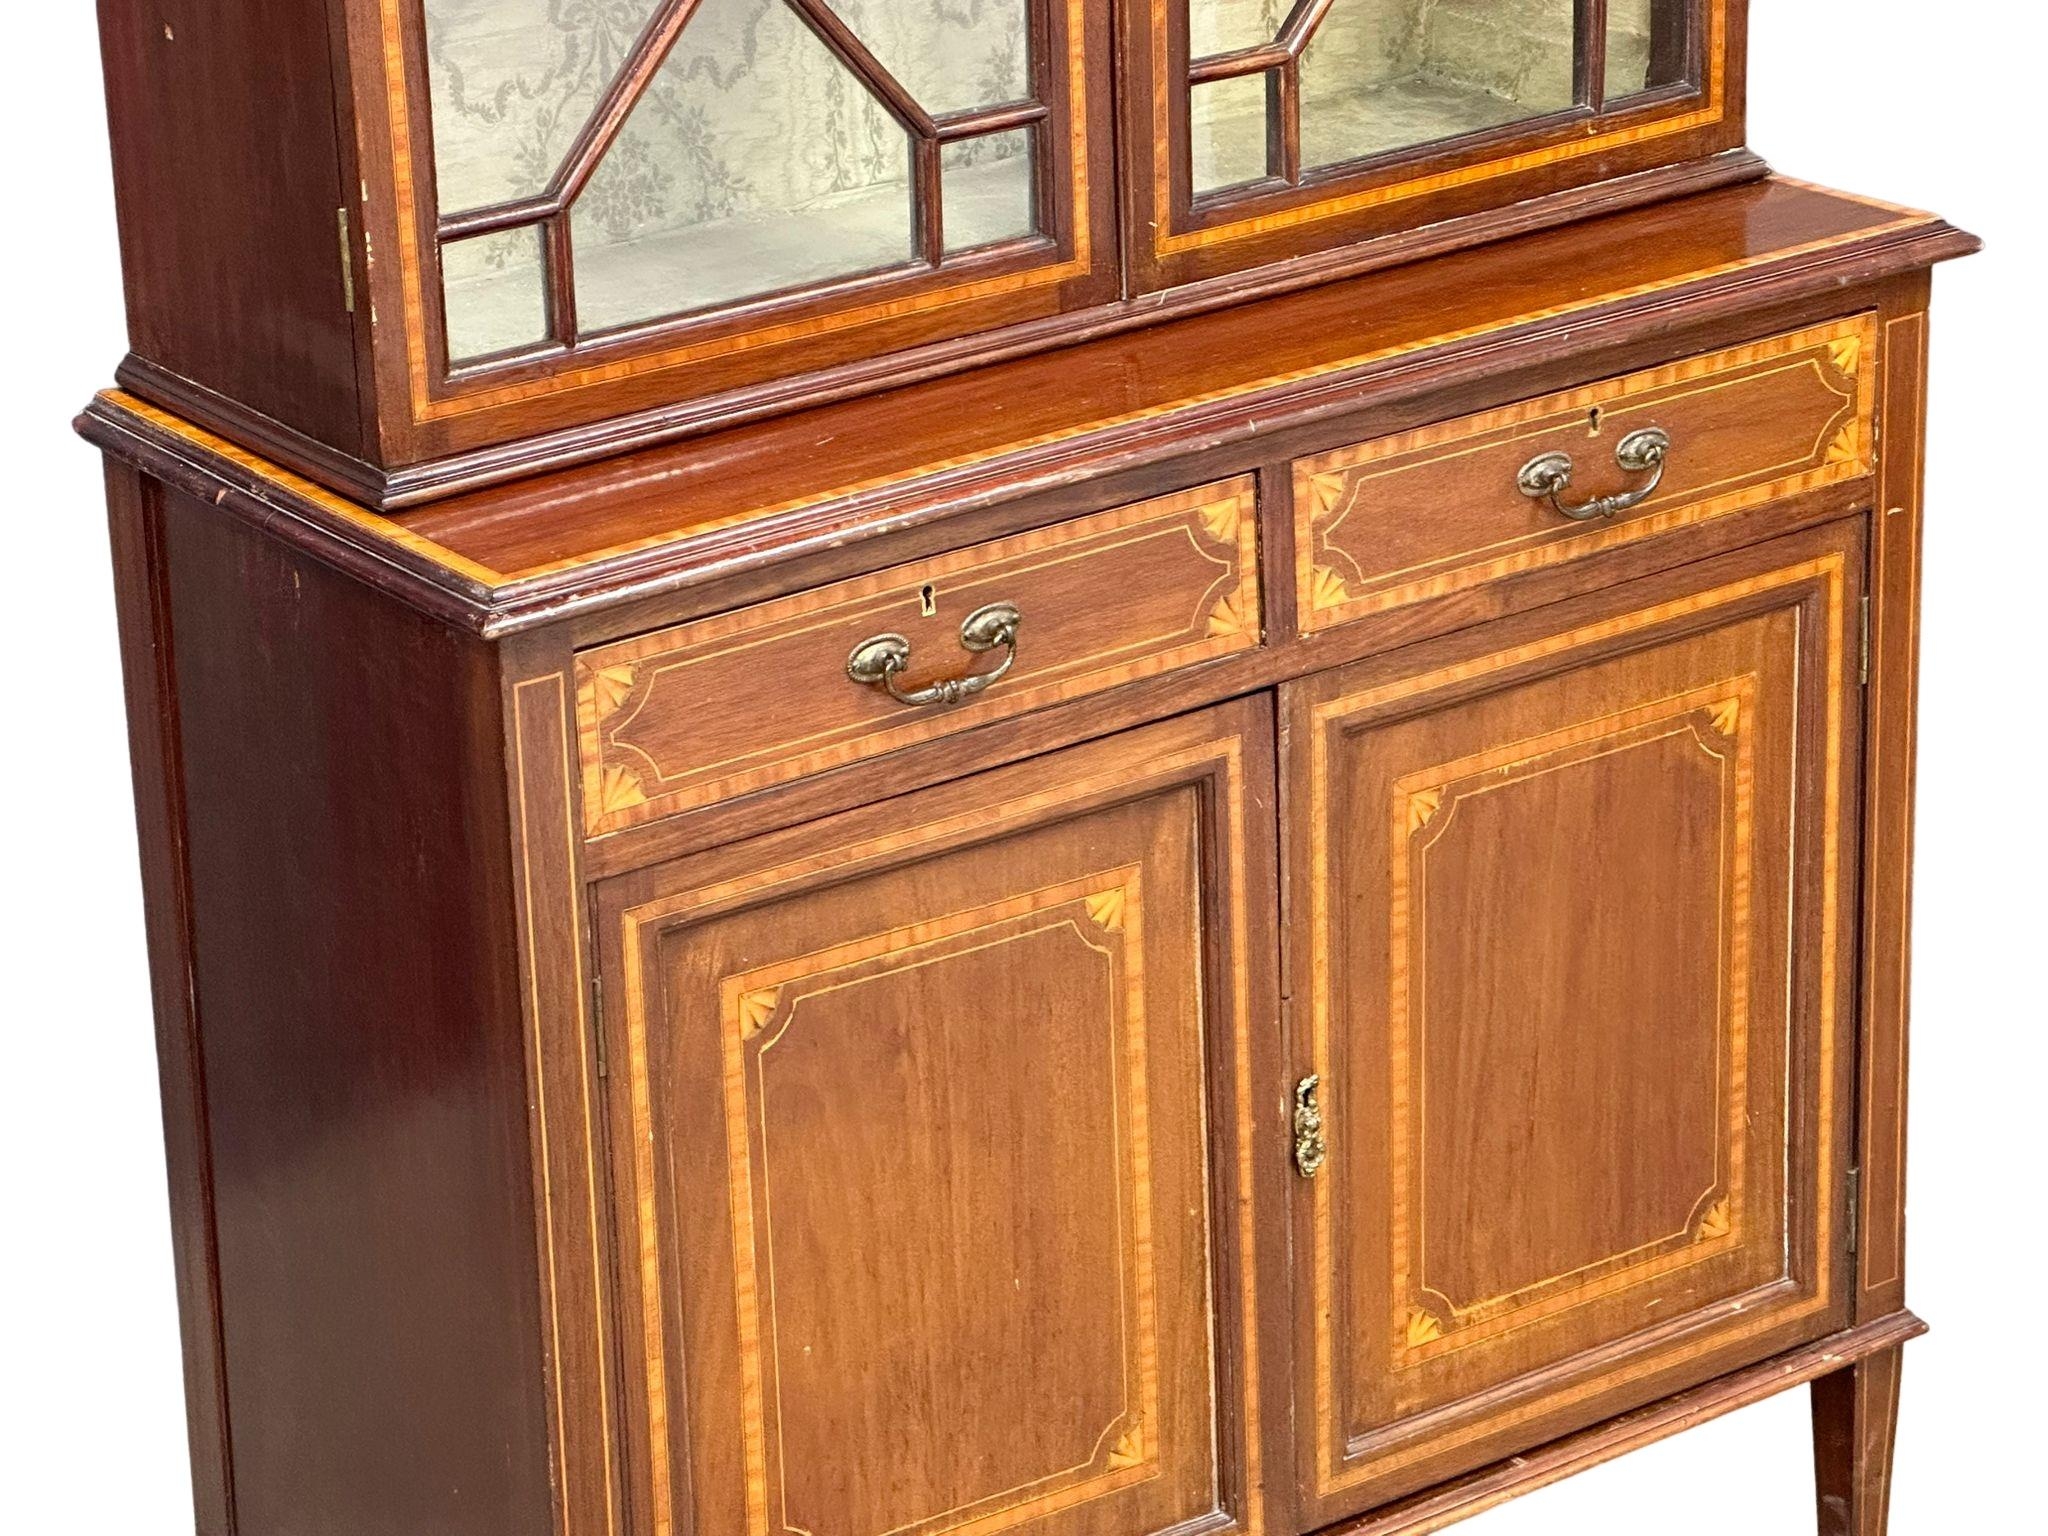 An early 20th Century Sheraton Revival Inlaid mahogany bookcase with 2 drawers - Image 8 of 9